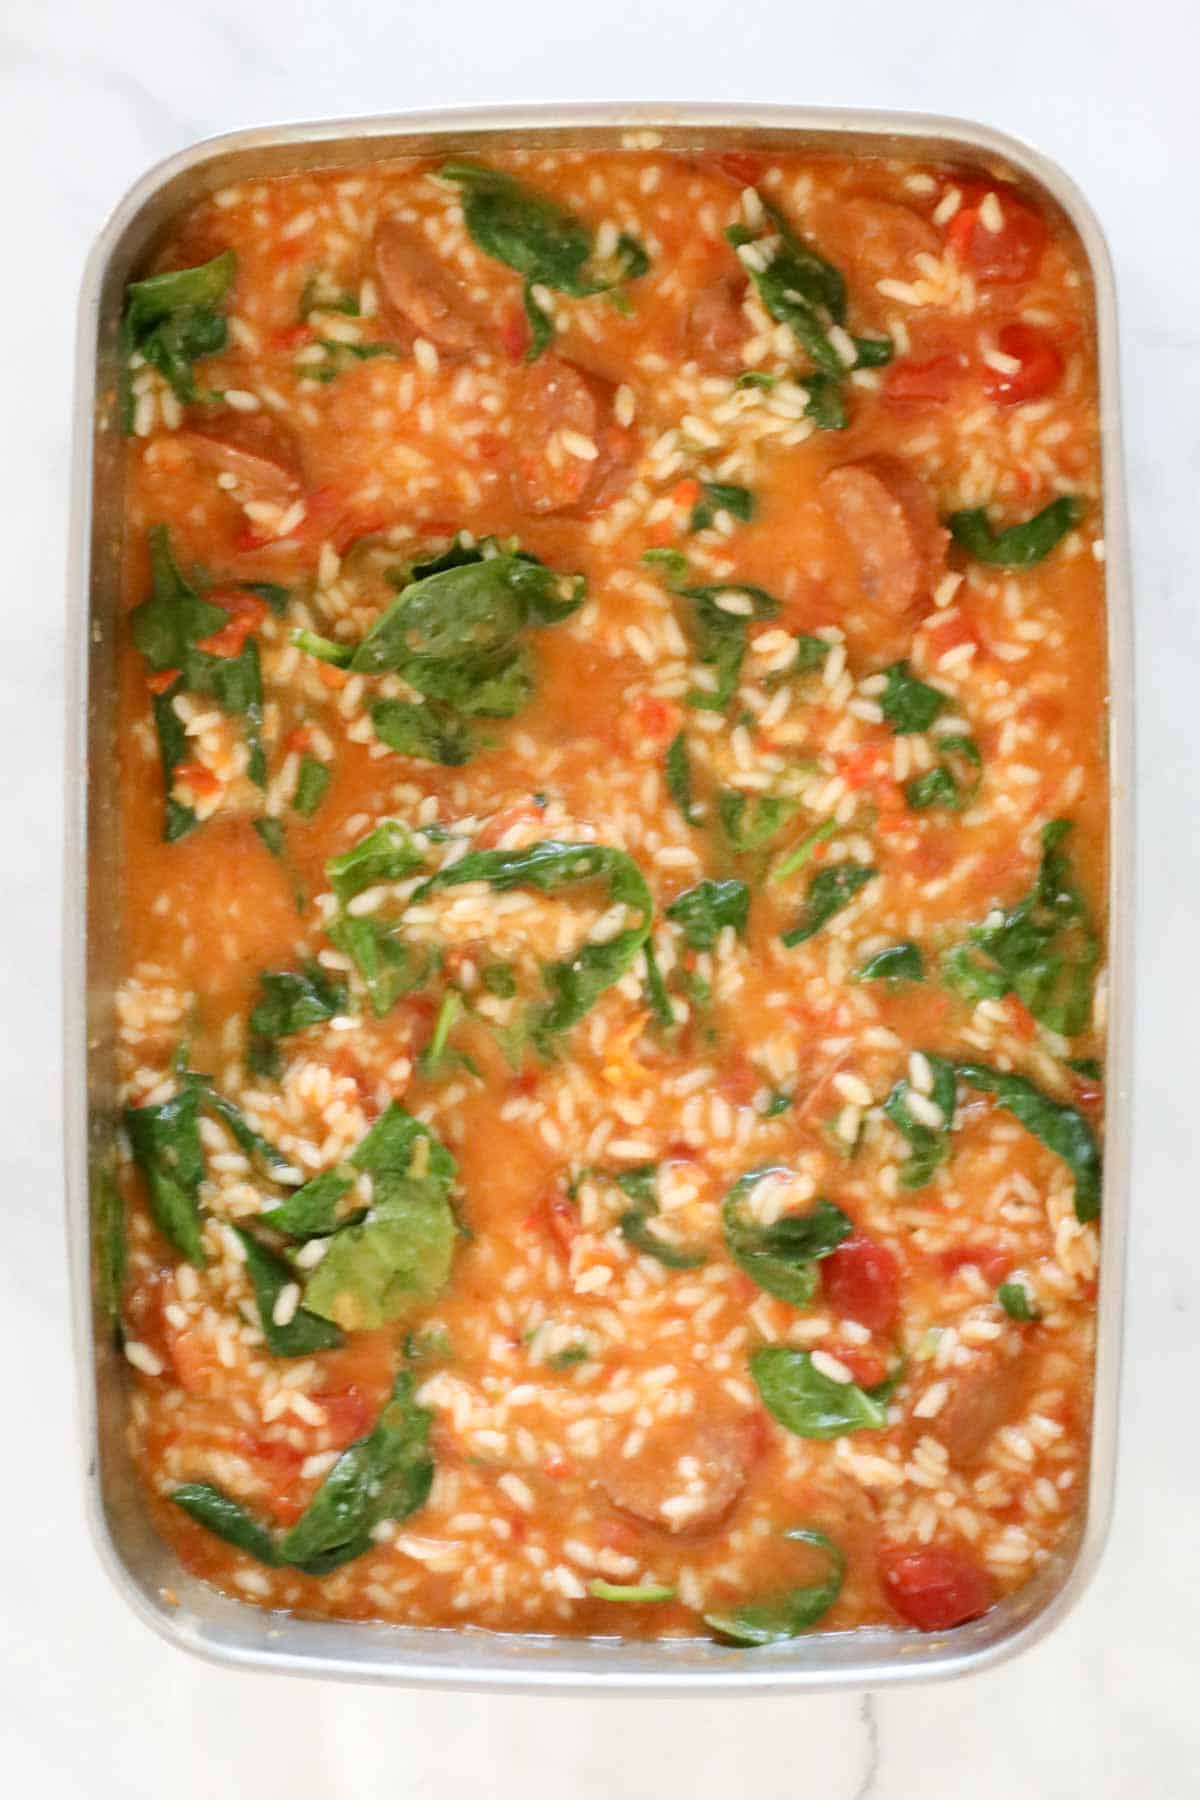 A Thermoserver filled with tomato and baby spinach risotto.